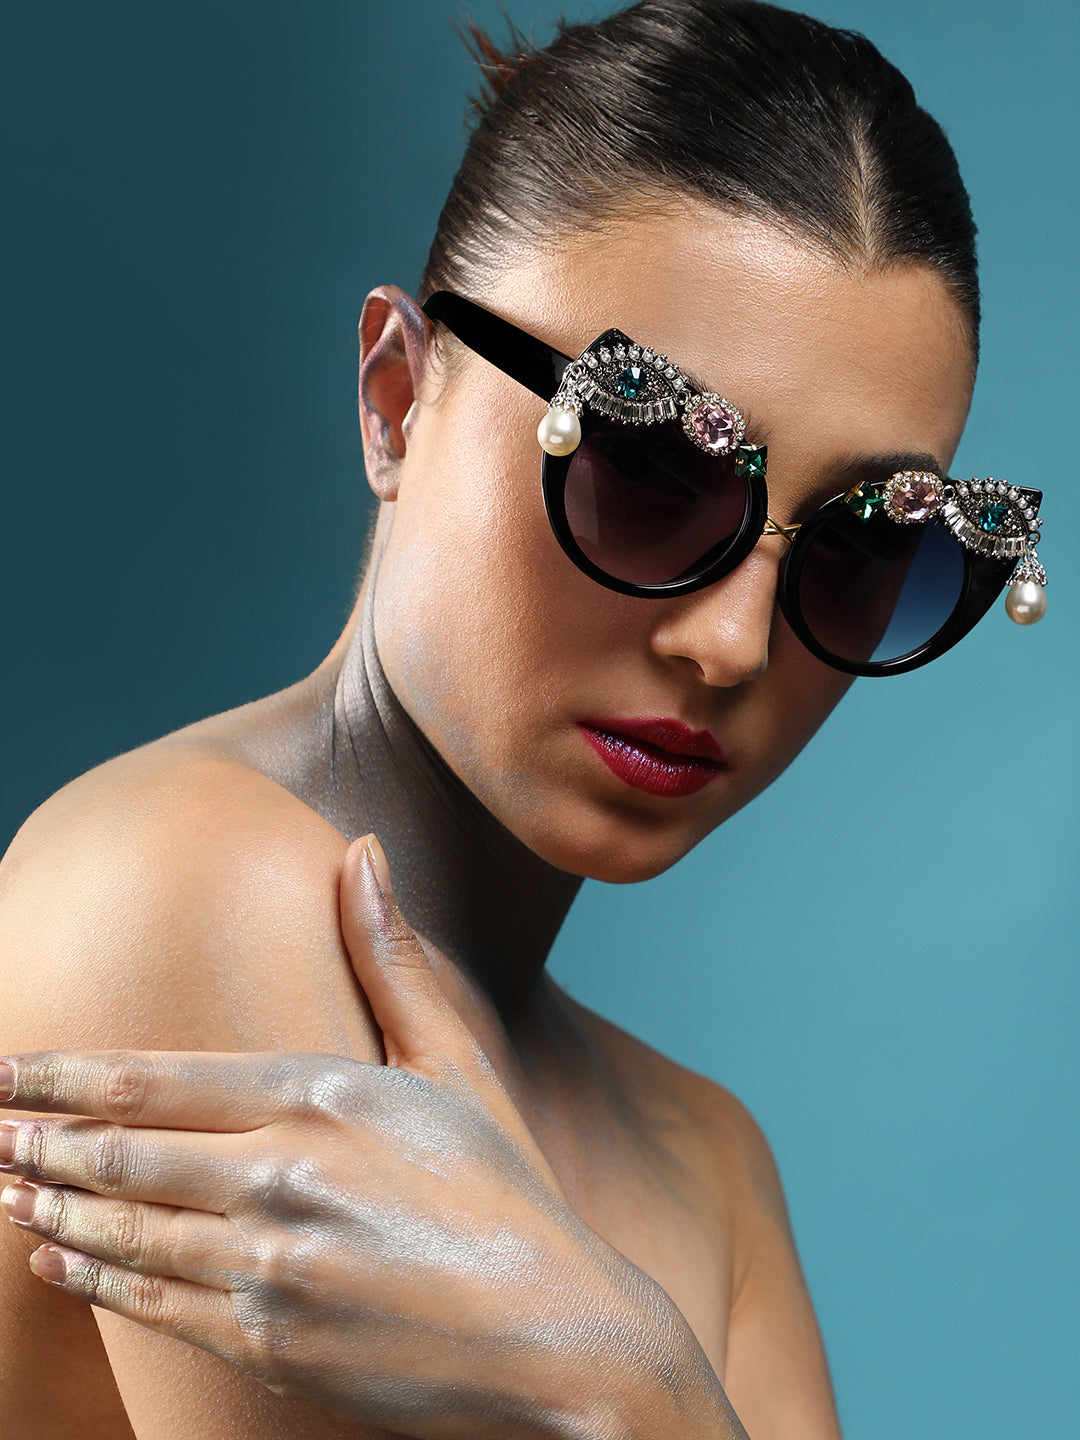 Glam Shades: Bedazzle Your Look